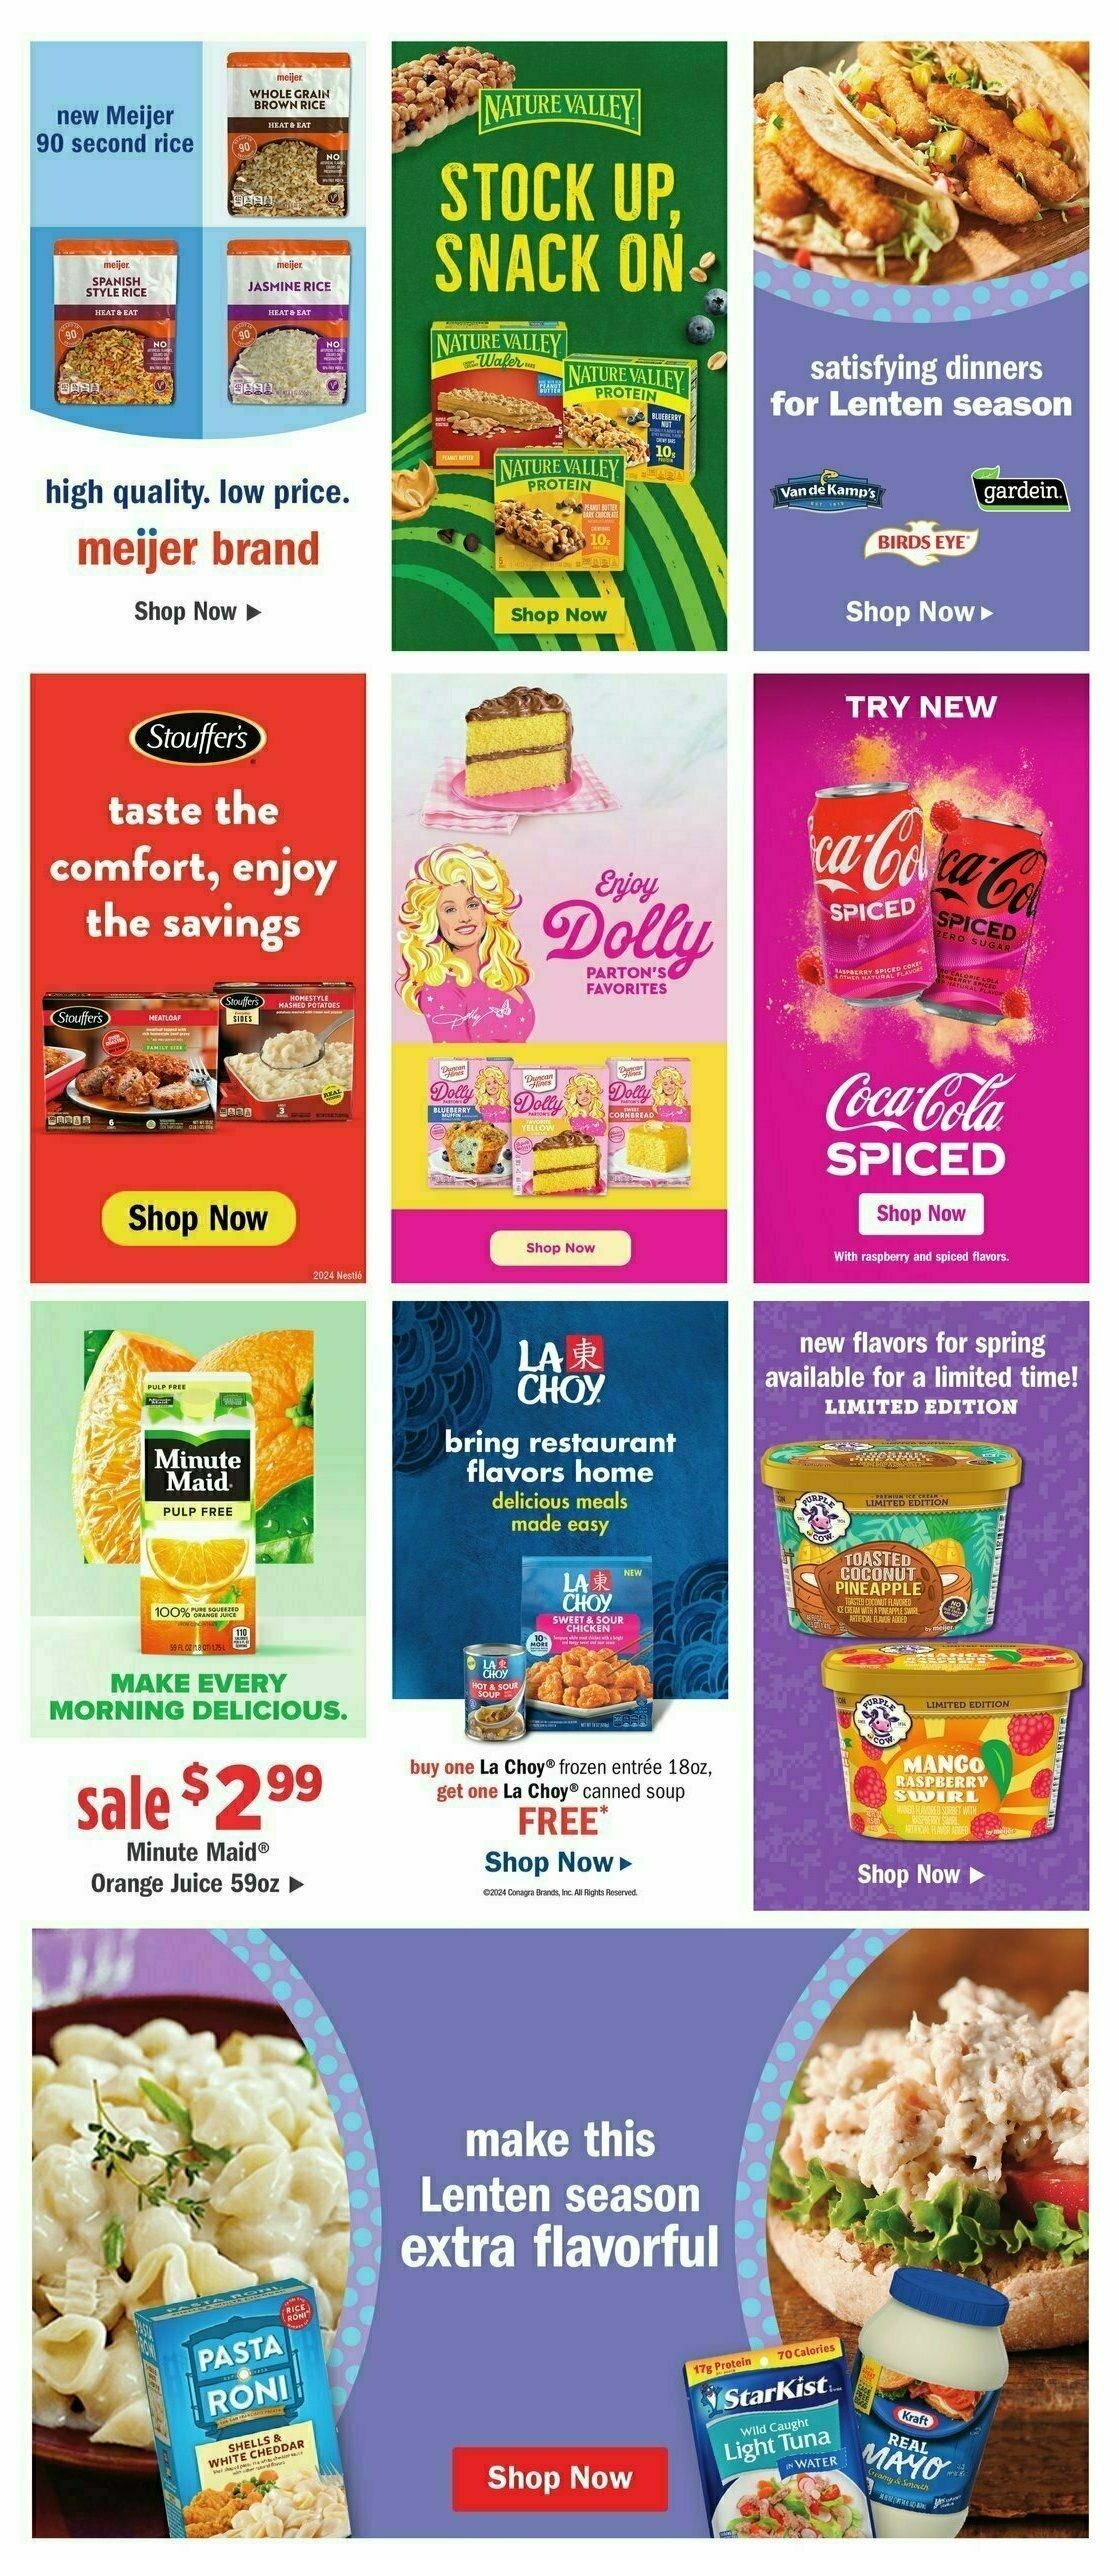 Meijer Weekly Ad from March 3